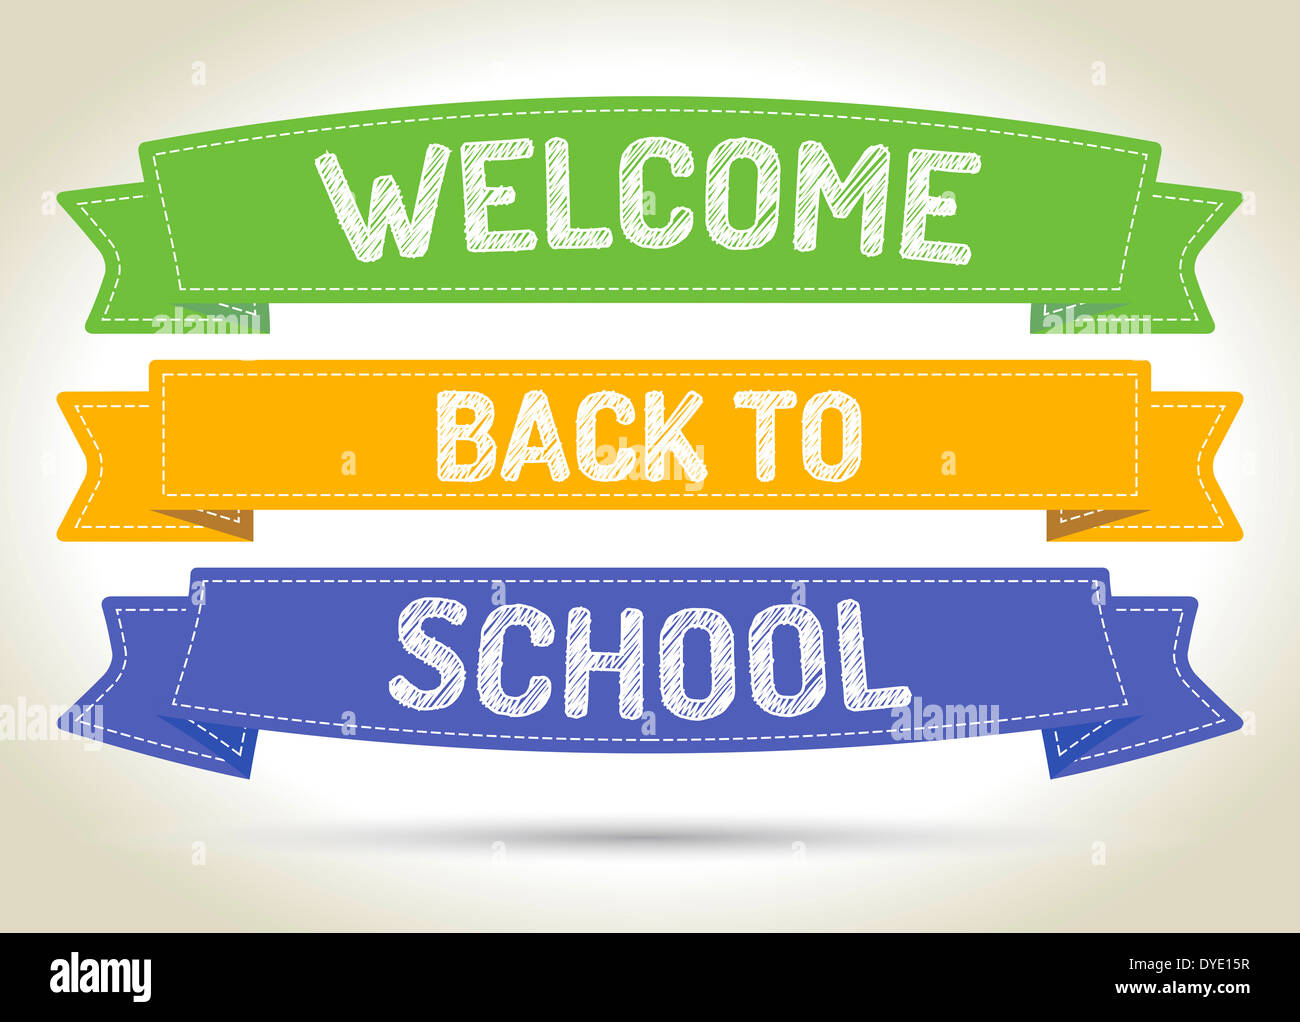 Welcome back to school - pen style text on colorized ribbons with shadow. Stock Photo